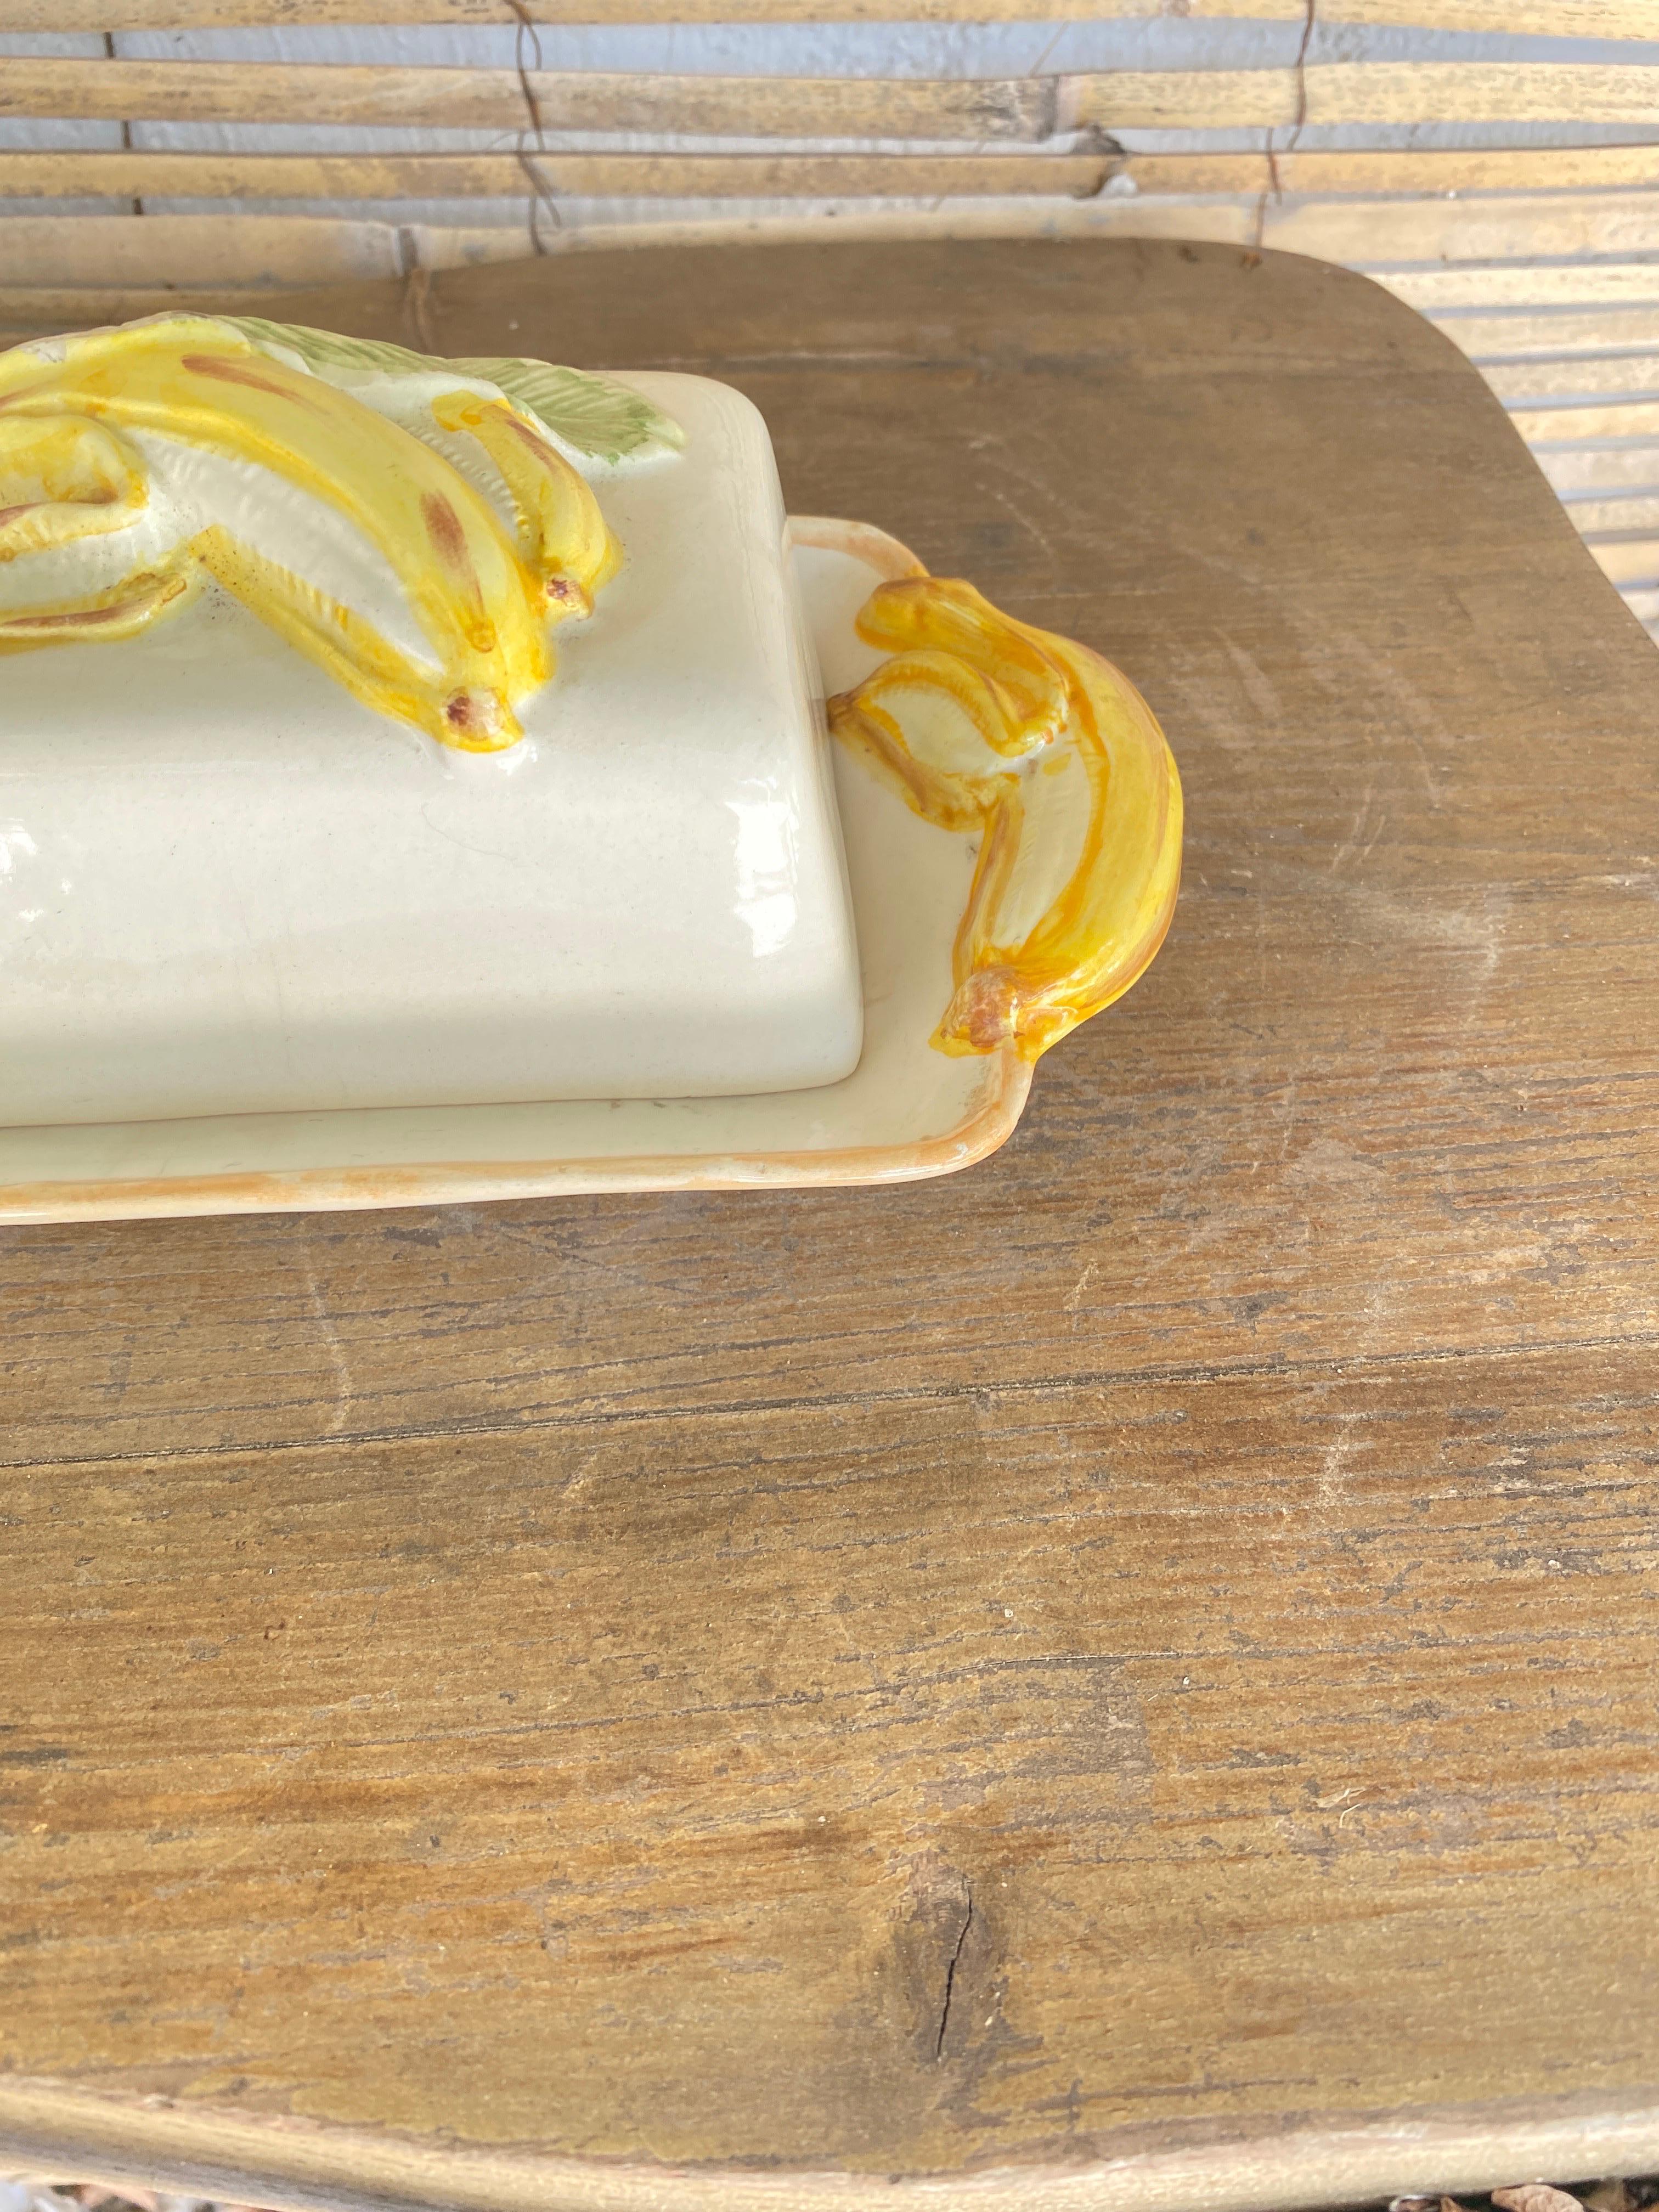 This Butter dish is made of ceramic. It is in the style of Majolica. Made in Portugal in the 1970s. It is made of white and yellow ceramic. Its decoration are yellow bananas sculpted in ceramic.